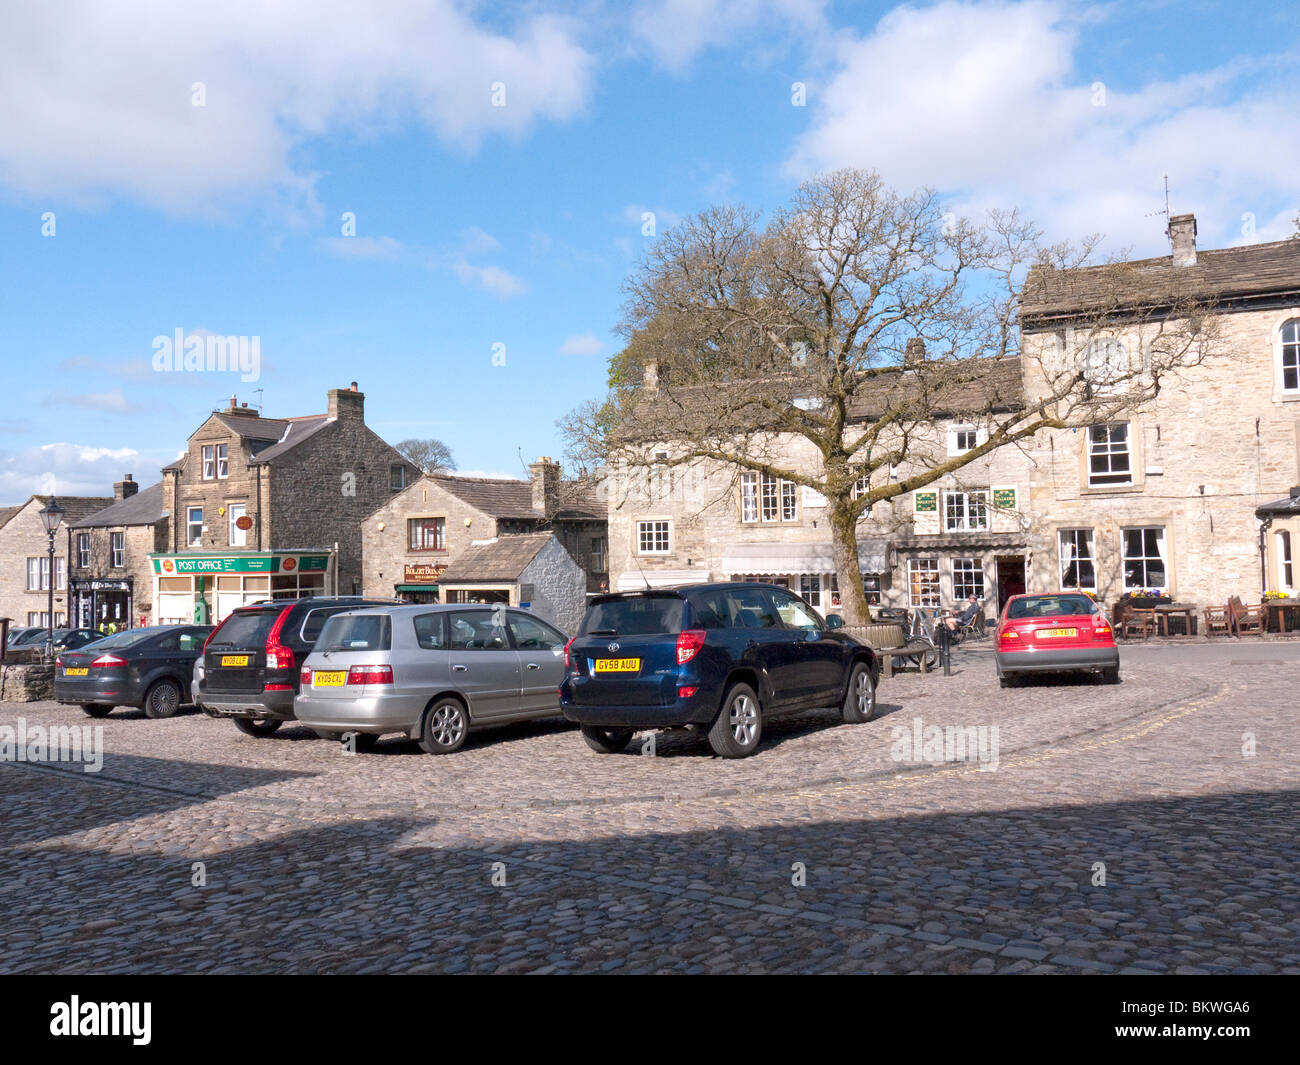 The beautiful town of Grassington in the North Yorkshire Dales in England full of stone cottages and country charm Stock Photo